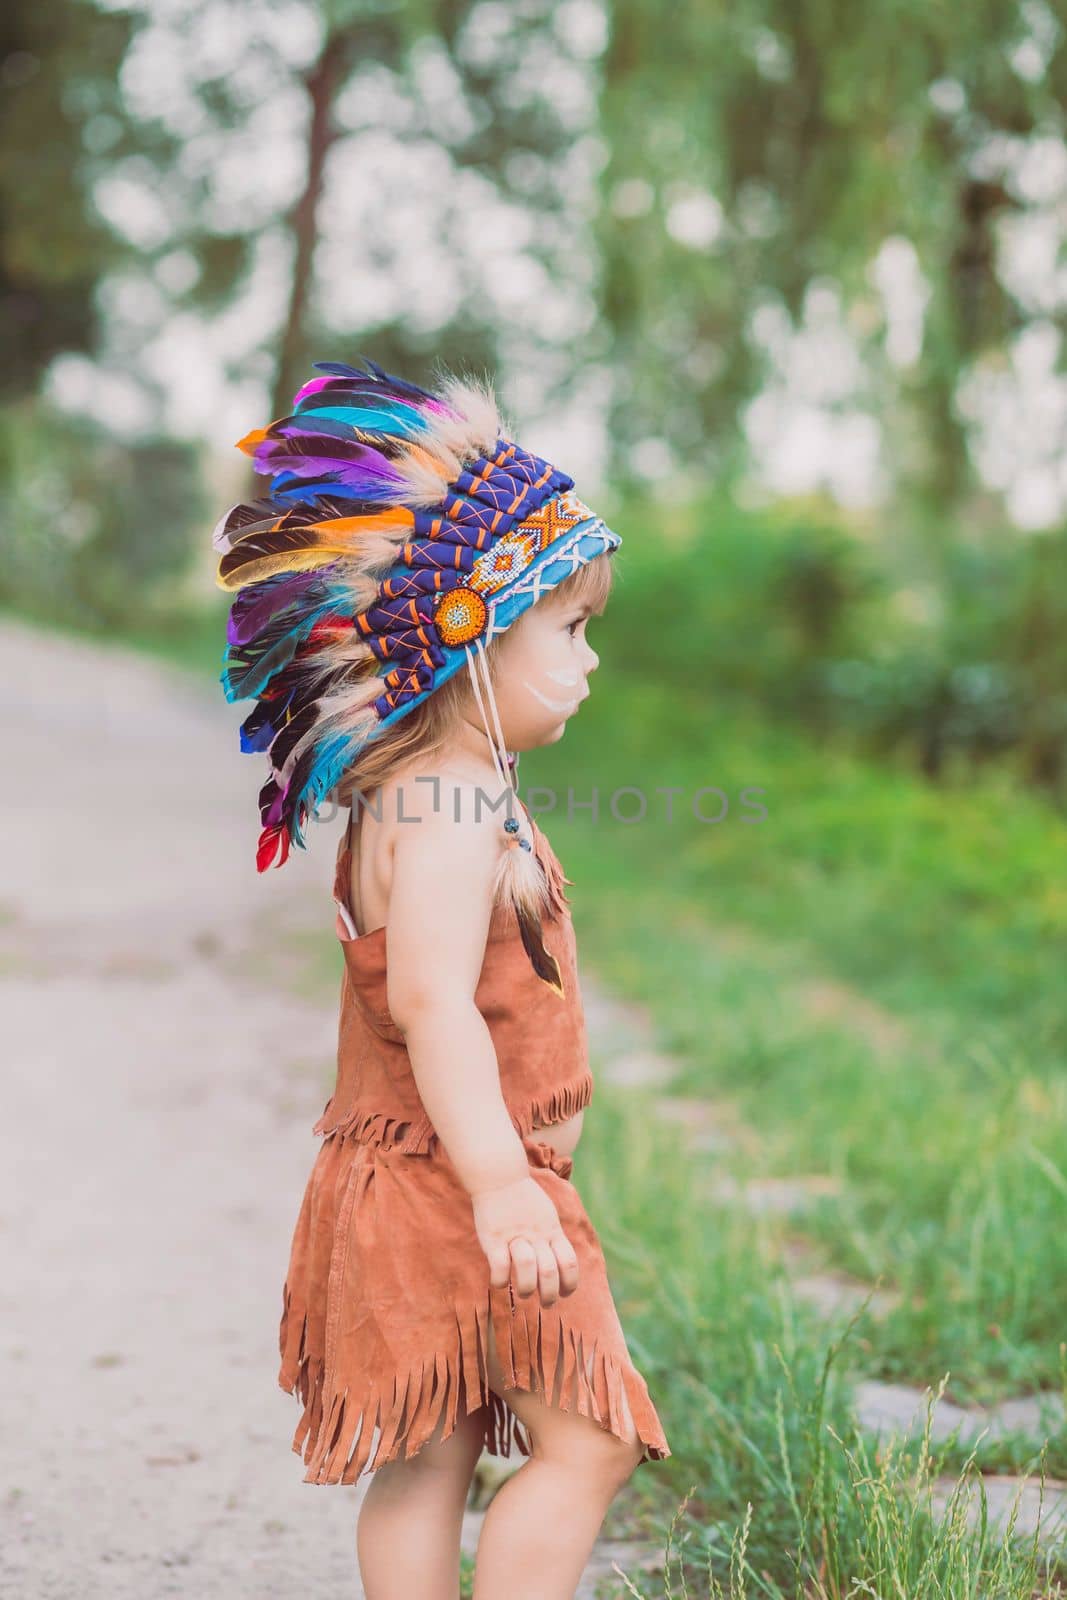 Cute baby dressed in traditional Native Americanс costume.